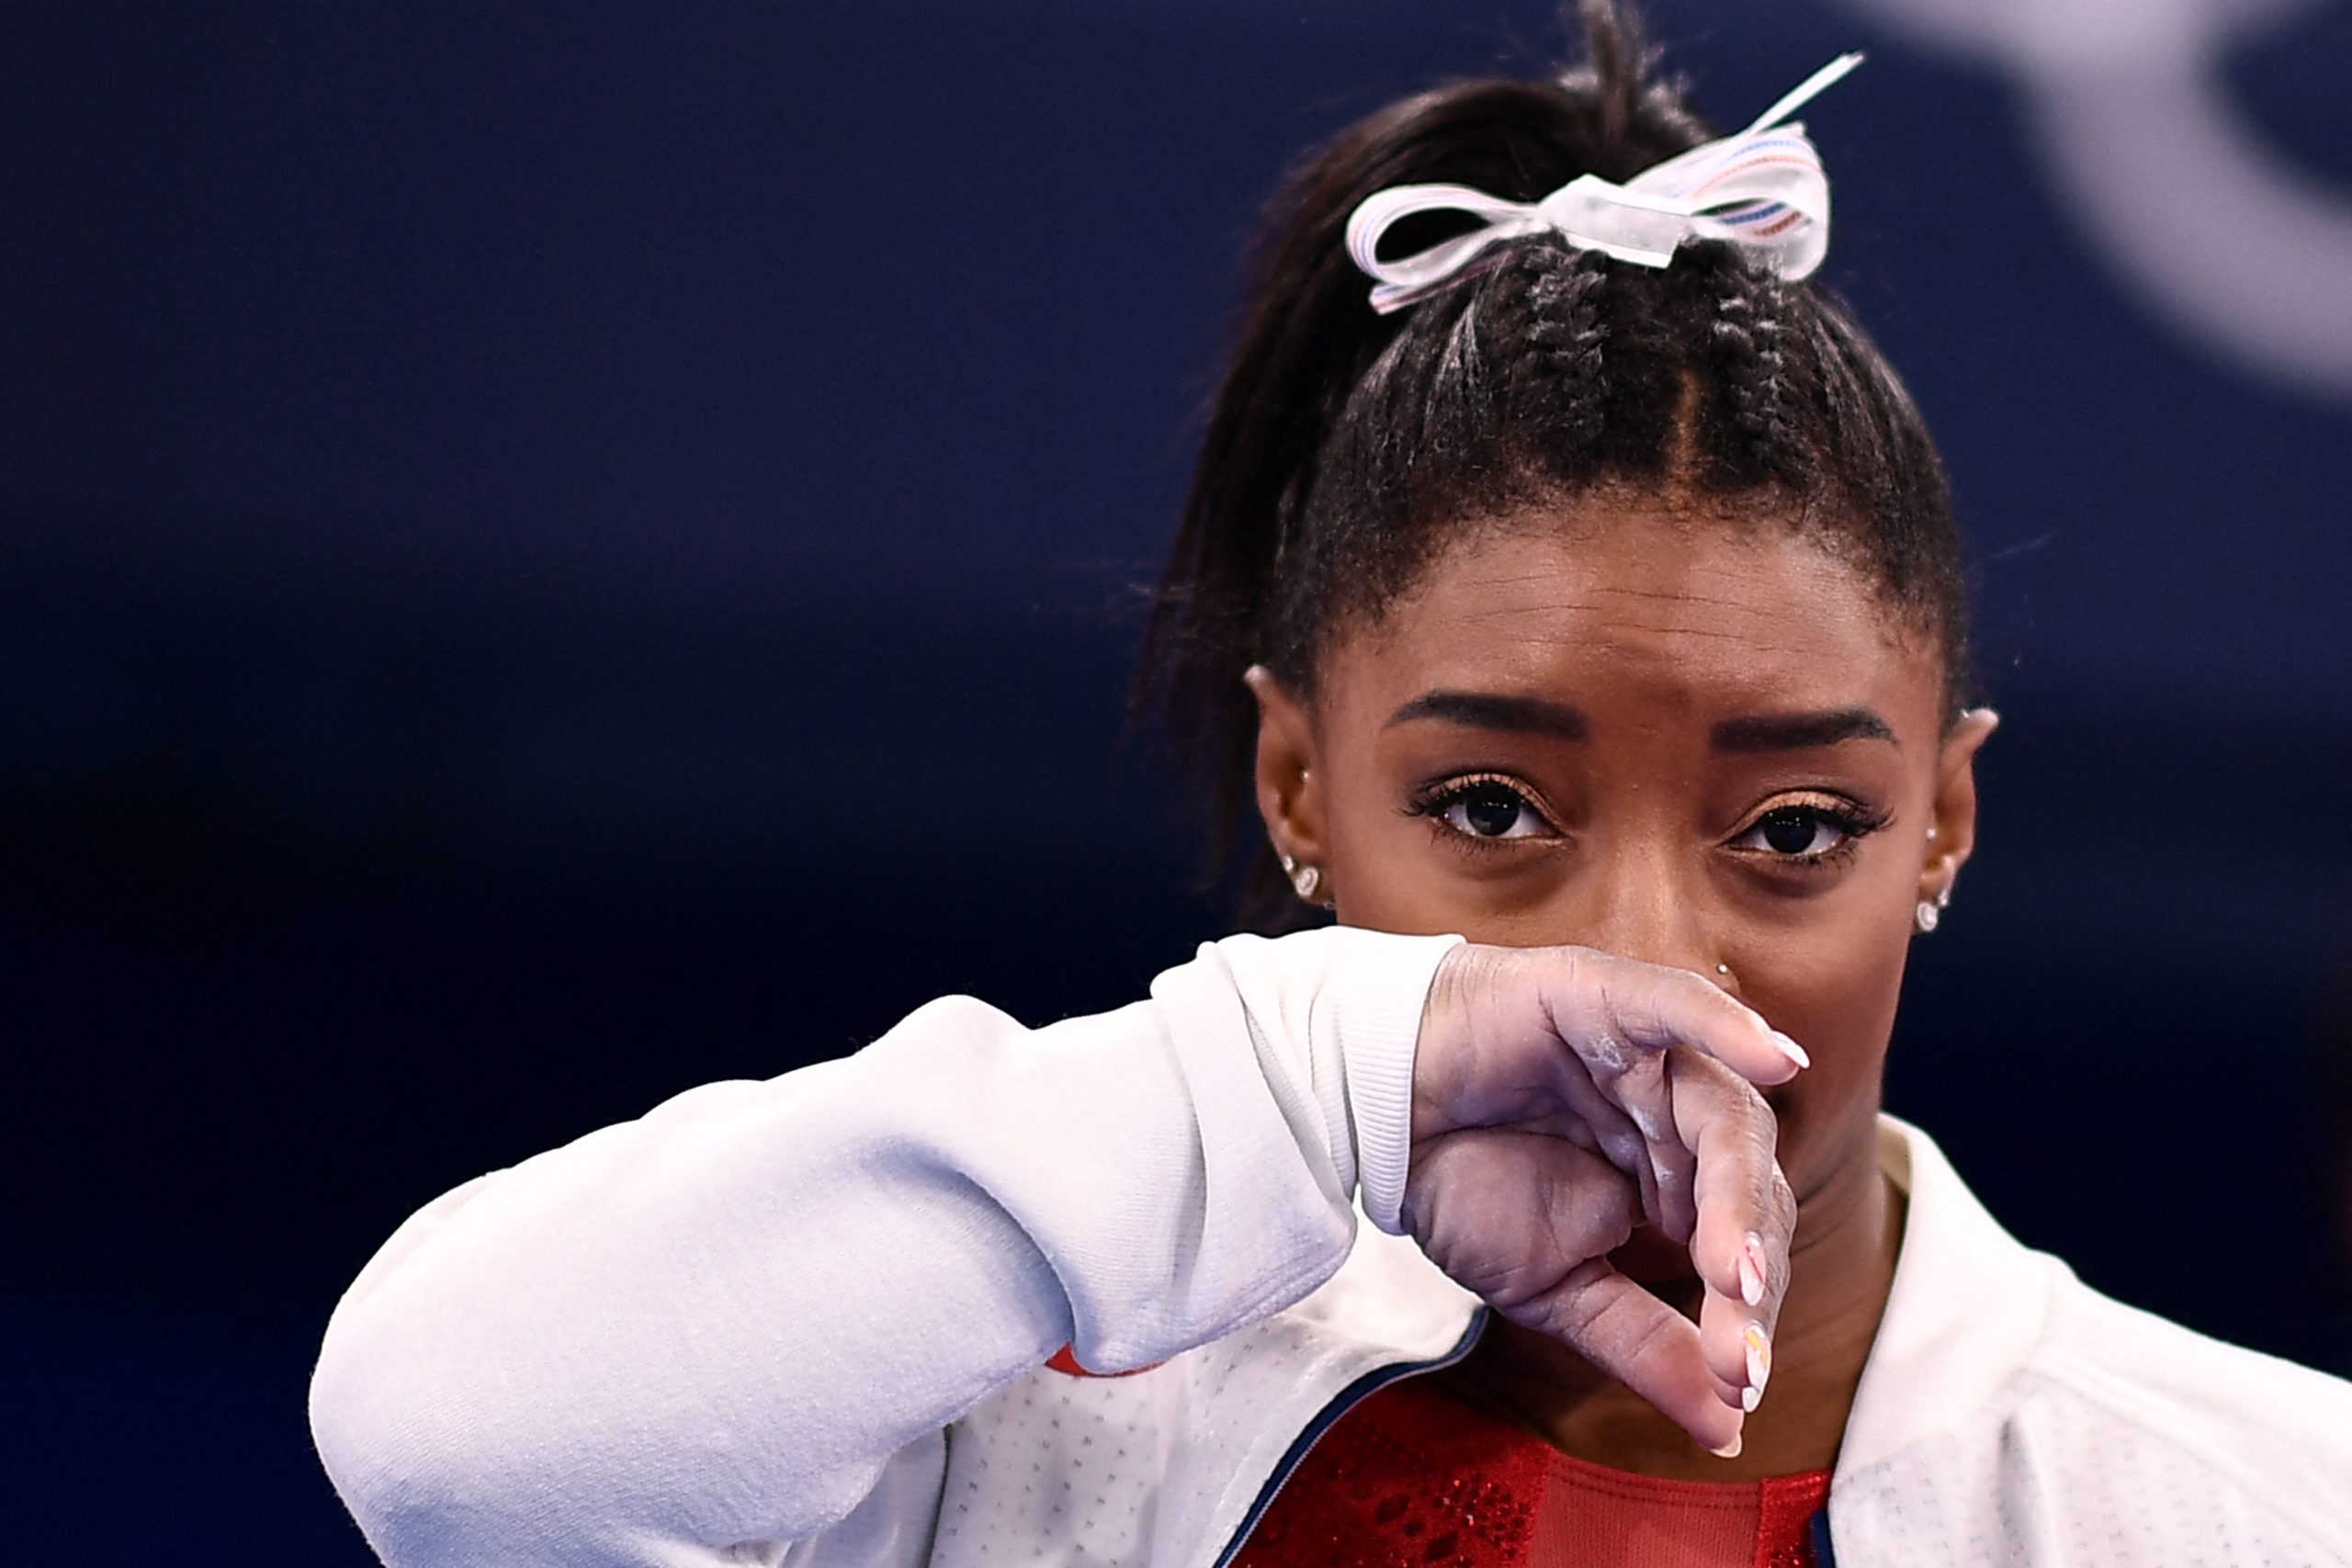 TOPSHOT - USA's Simone Biles gestures during the artistic gymnastics women's team final during the Tokyo 2020 Olympic Games at the Ariake Gymnastics Centre in Tokyo on July 27, 2021. (Photo by Loic VENANCE / AFP) (Photo by LOIC VENANCE/AFP via Getty Images)